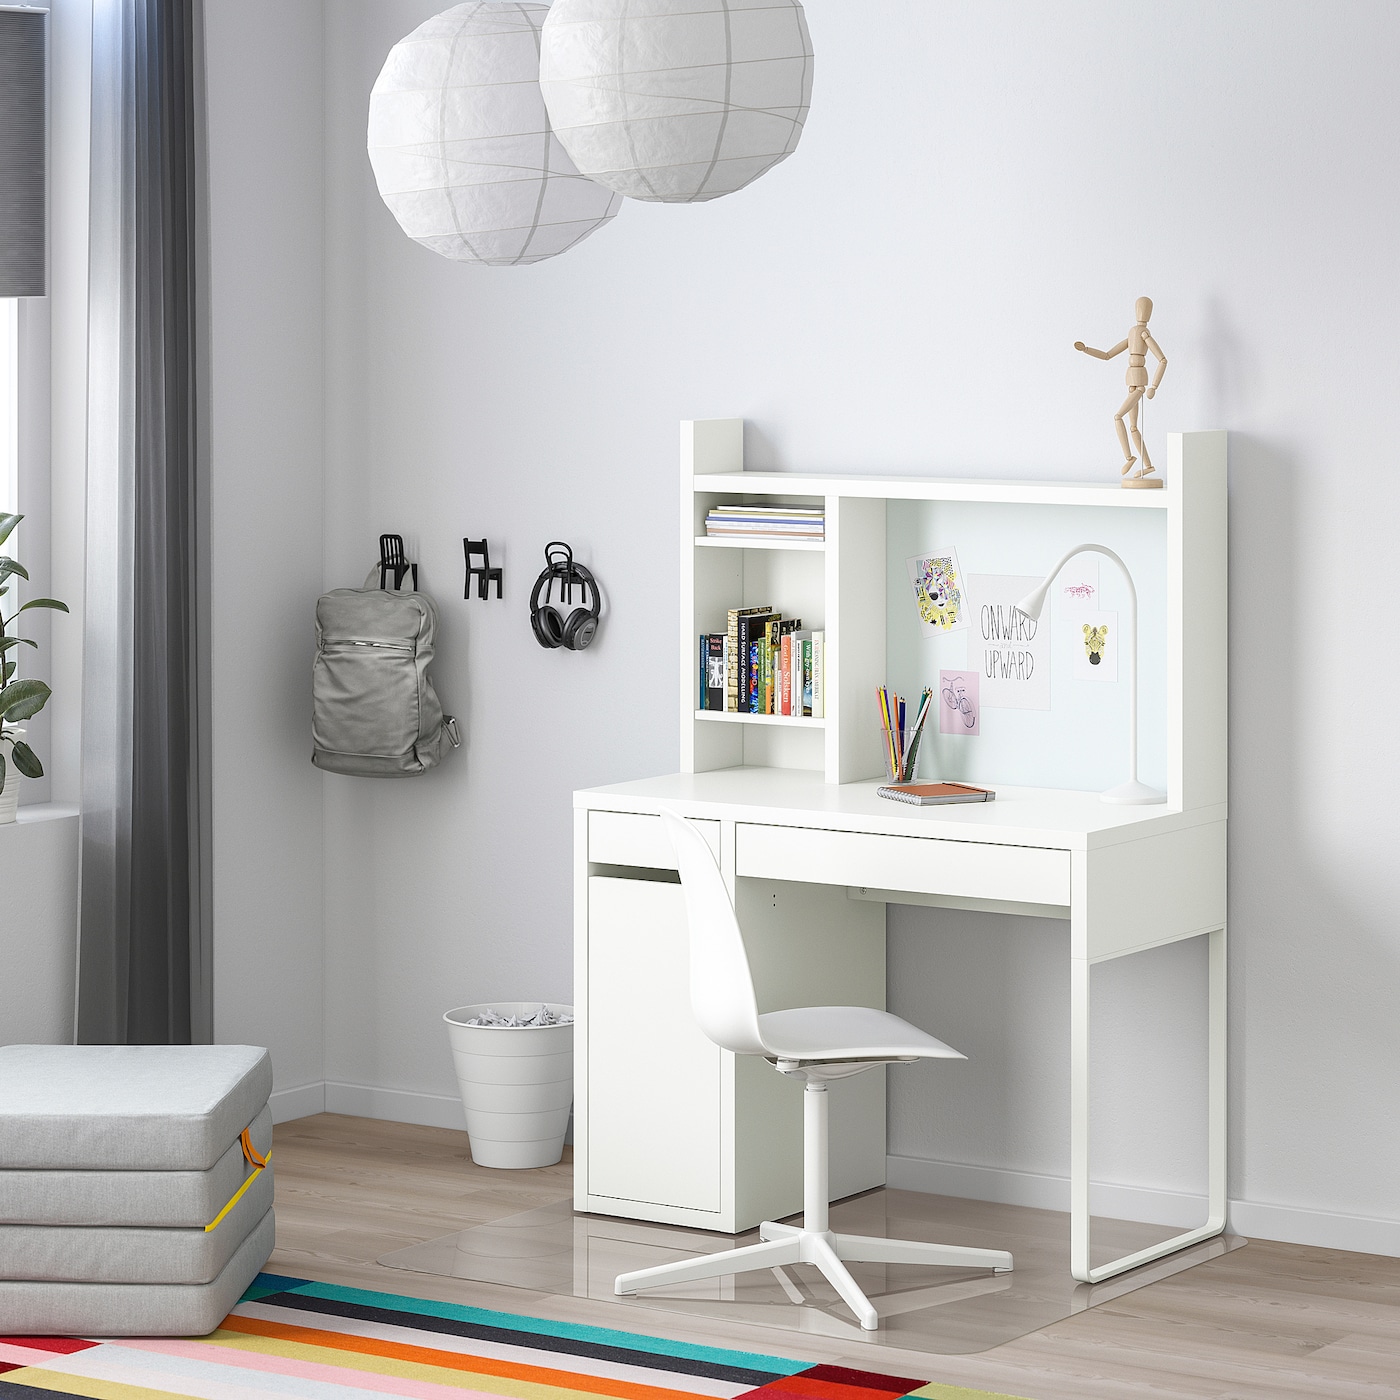 Micke desk – an ideal choice for your room